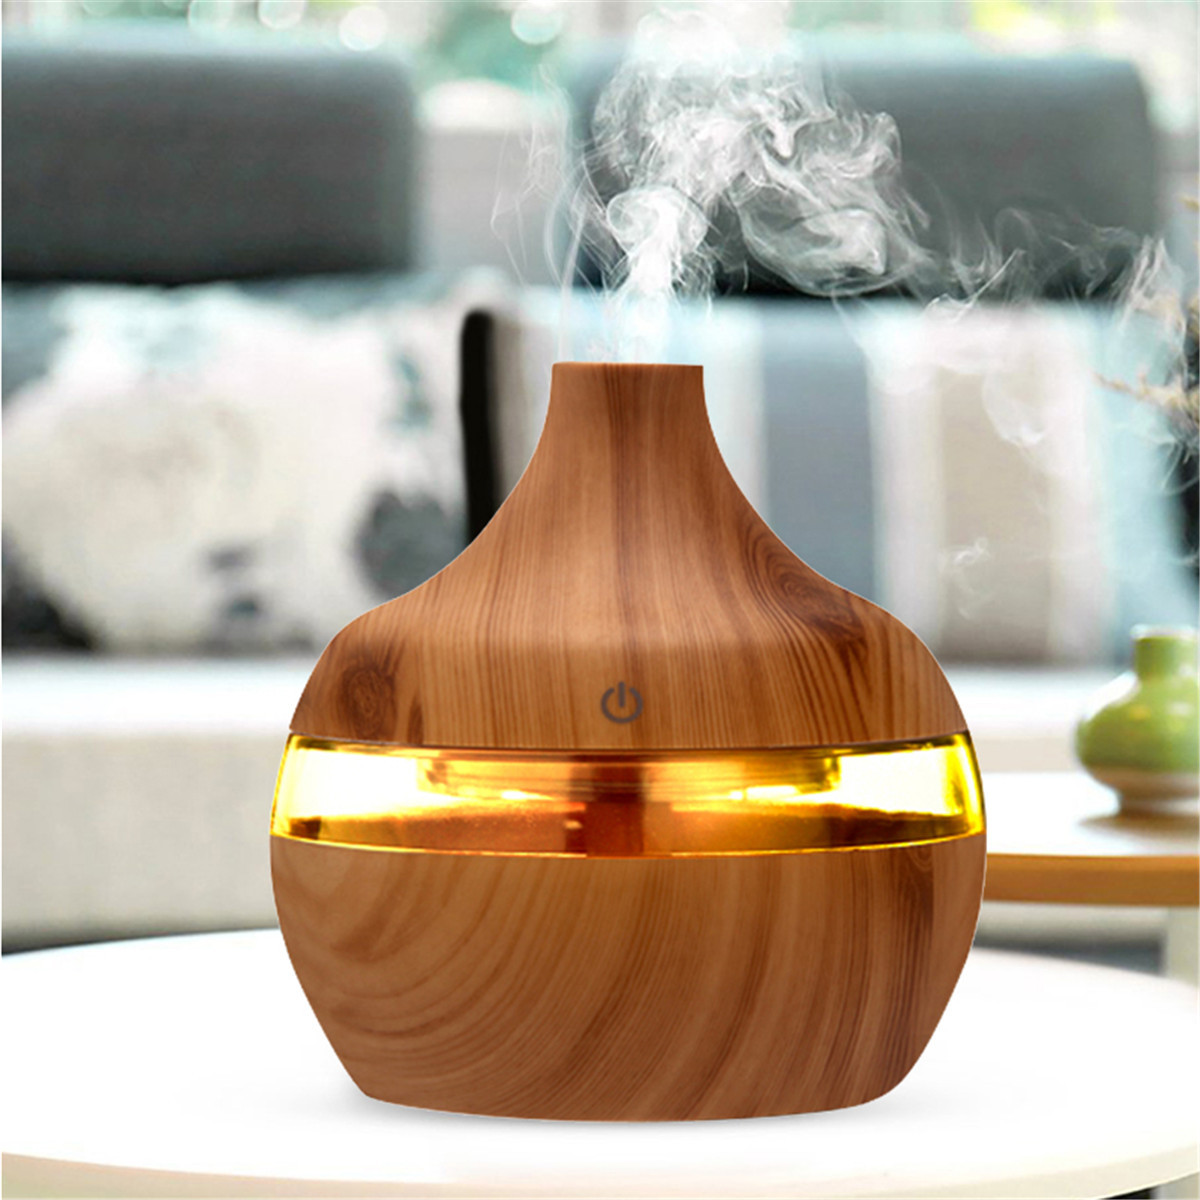 300ml Electric Ultrasonic Air Mist Humidifier Purifier Aroma Diffuser 7 Colors LED USB Charging for Bedroom Home Car Office 1